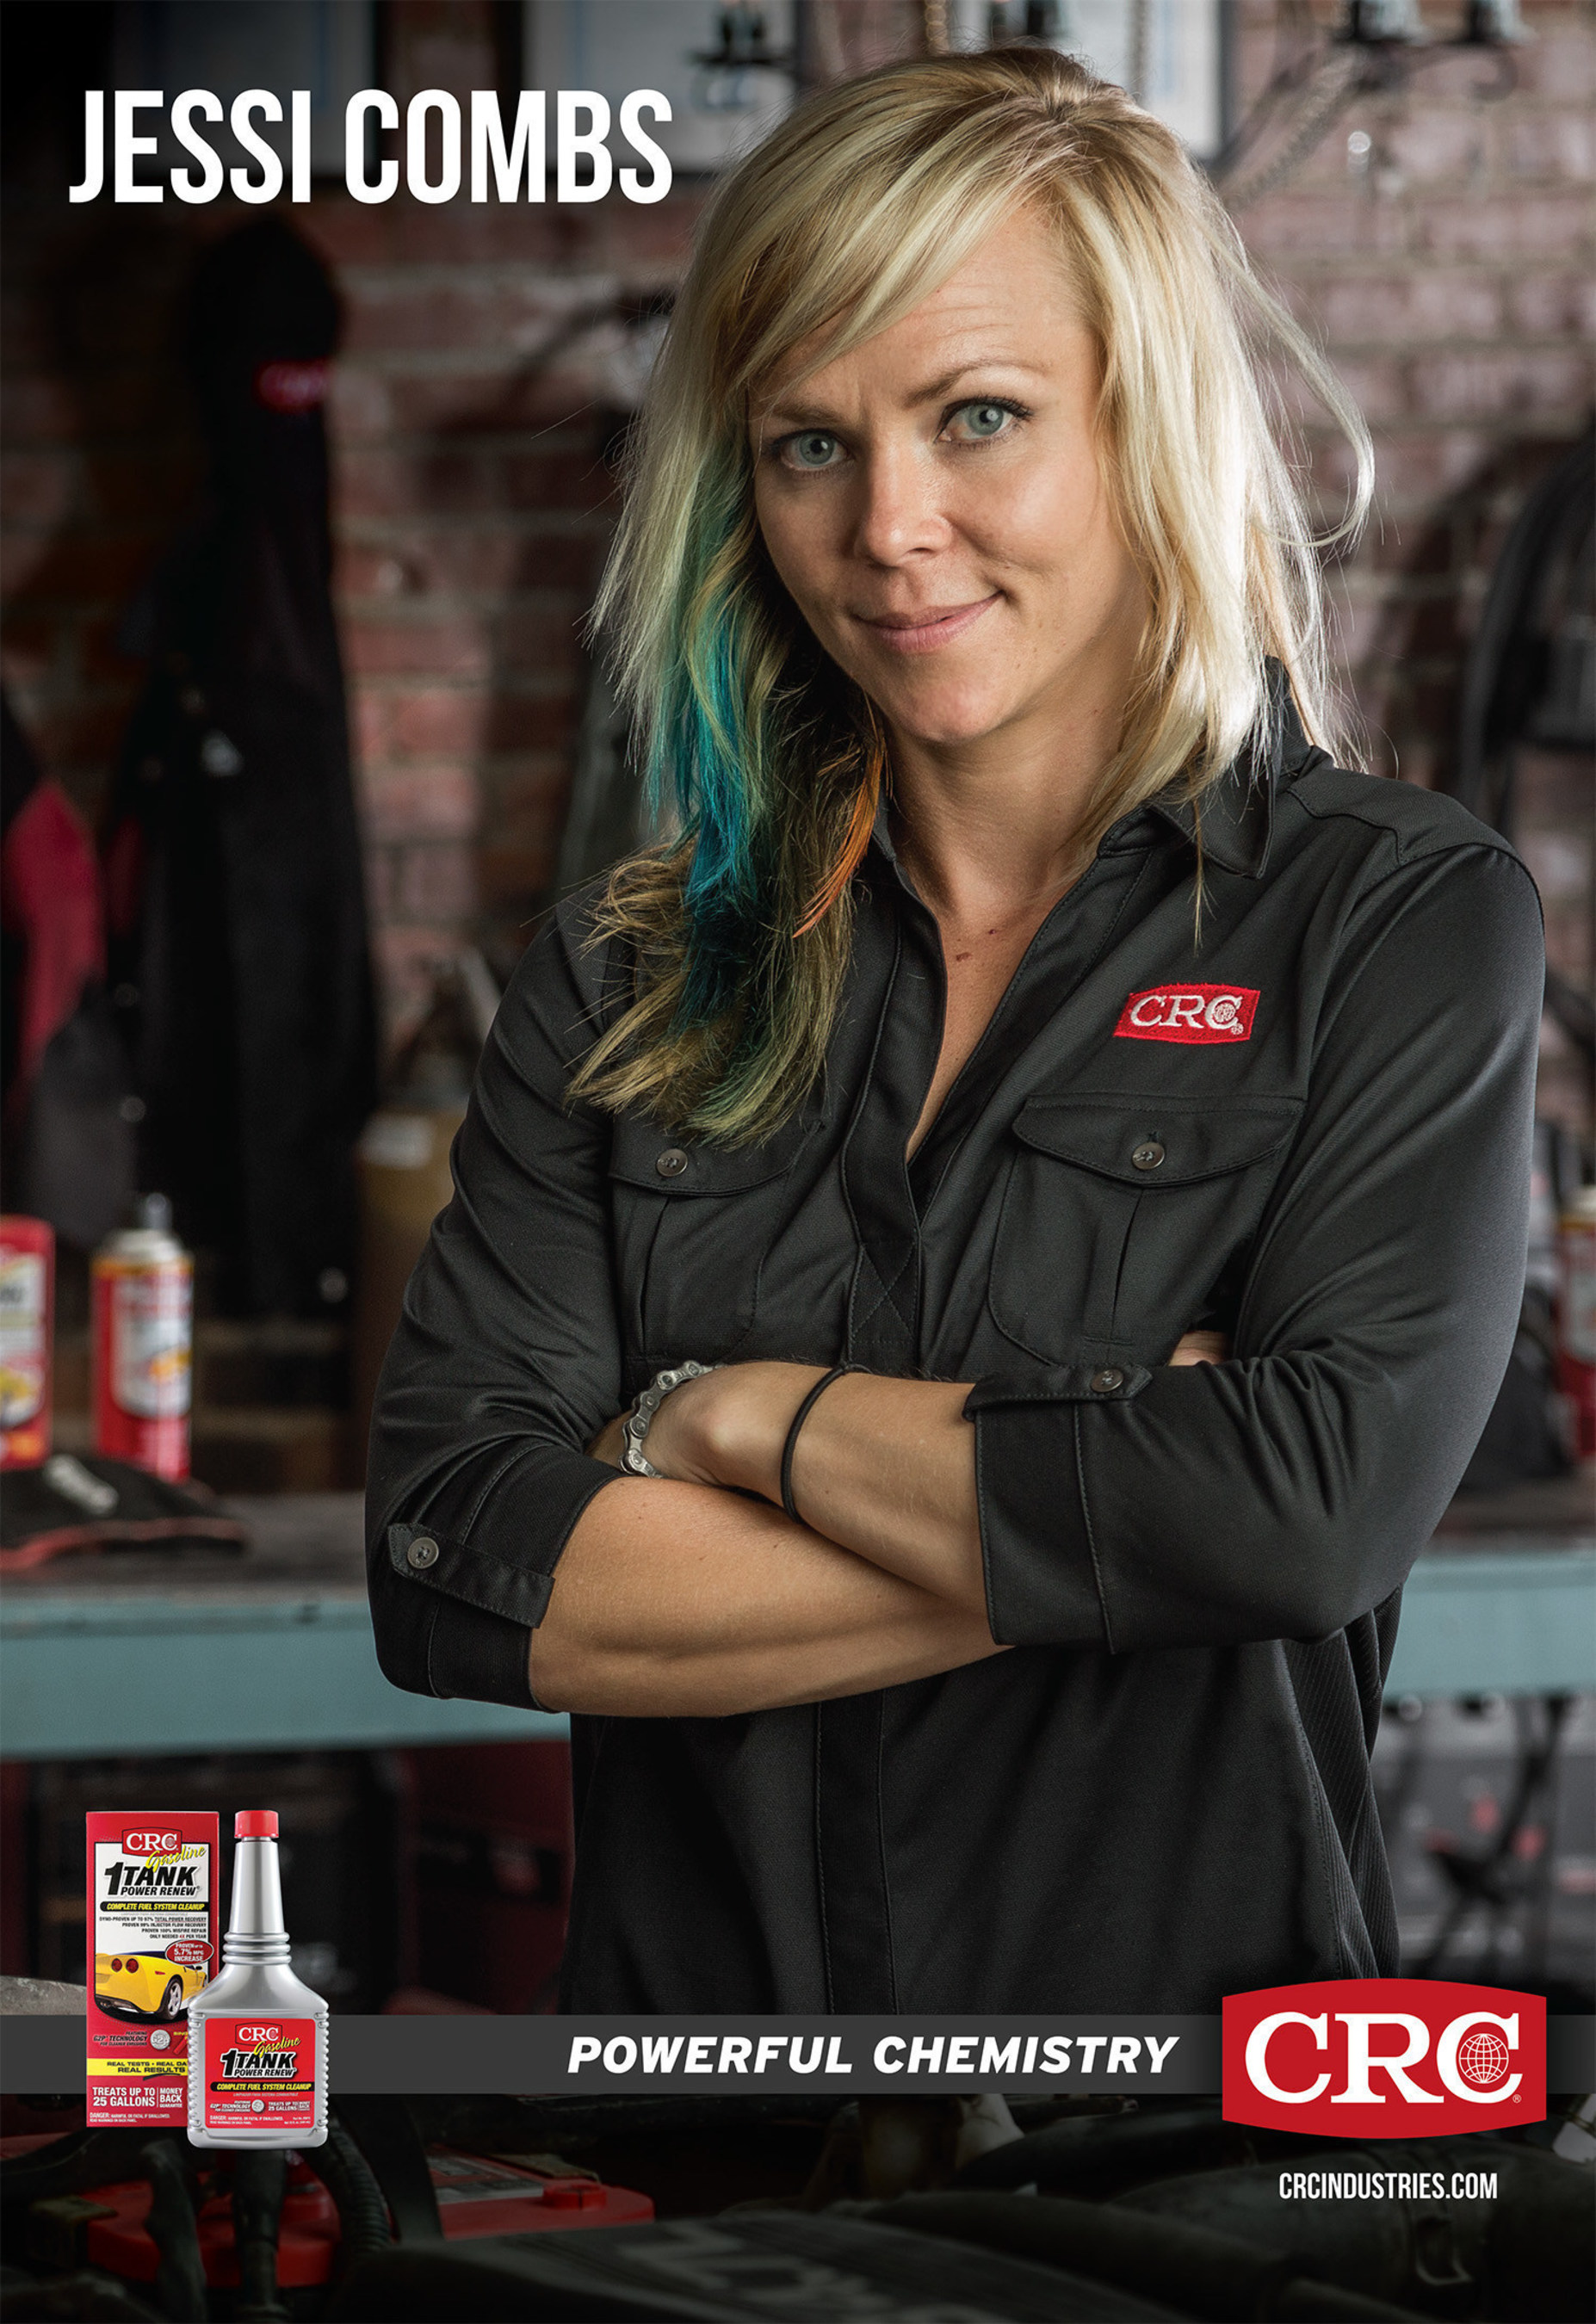 CRC spokeswoman and automotive personality Jessi Combs to greet fans at CRC booth #13053 at SEMA on Tuesday, November 3rd from 3:30-5pm.